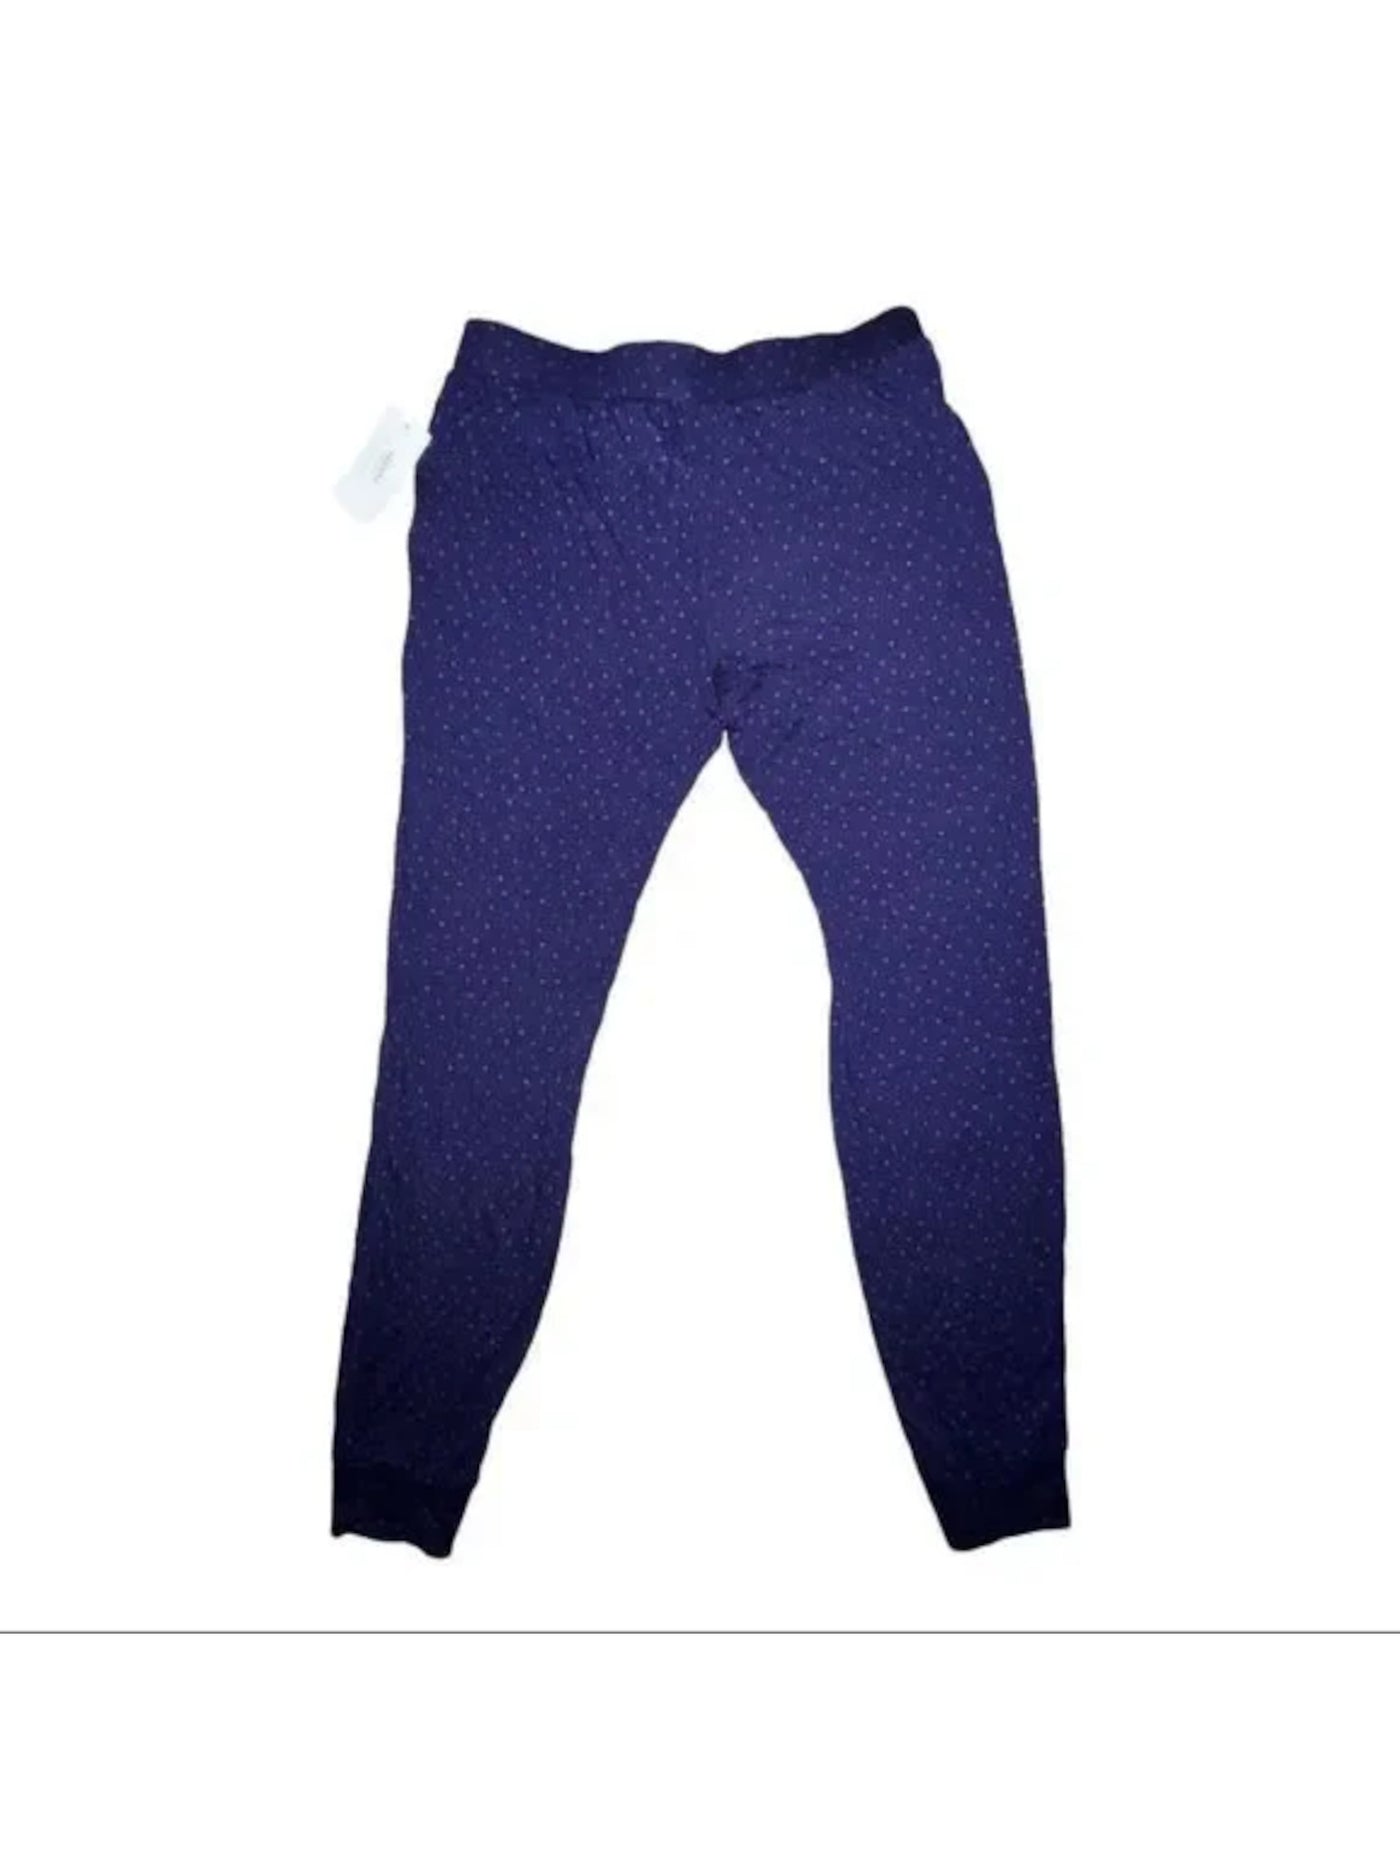 ALFANI Intimates Navy Pocketed Pull On Faux Button Fly Cuffed Sleep Pants XS